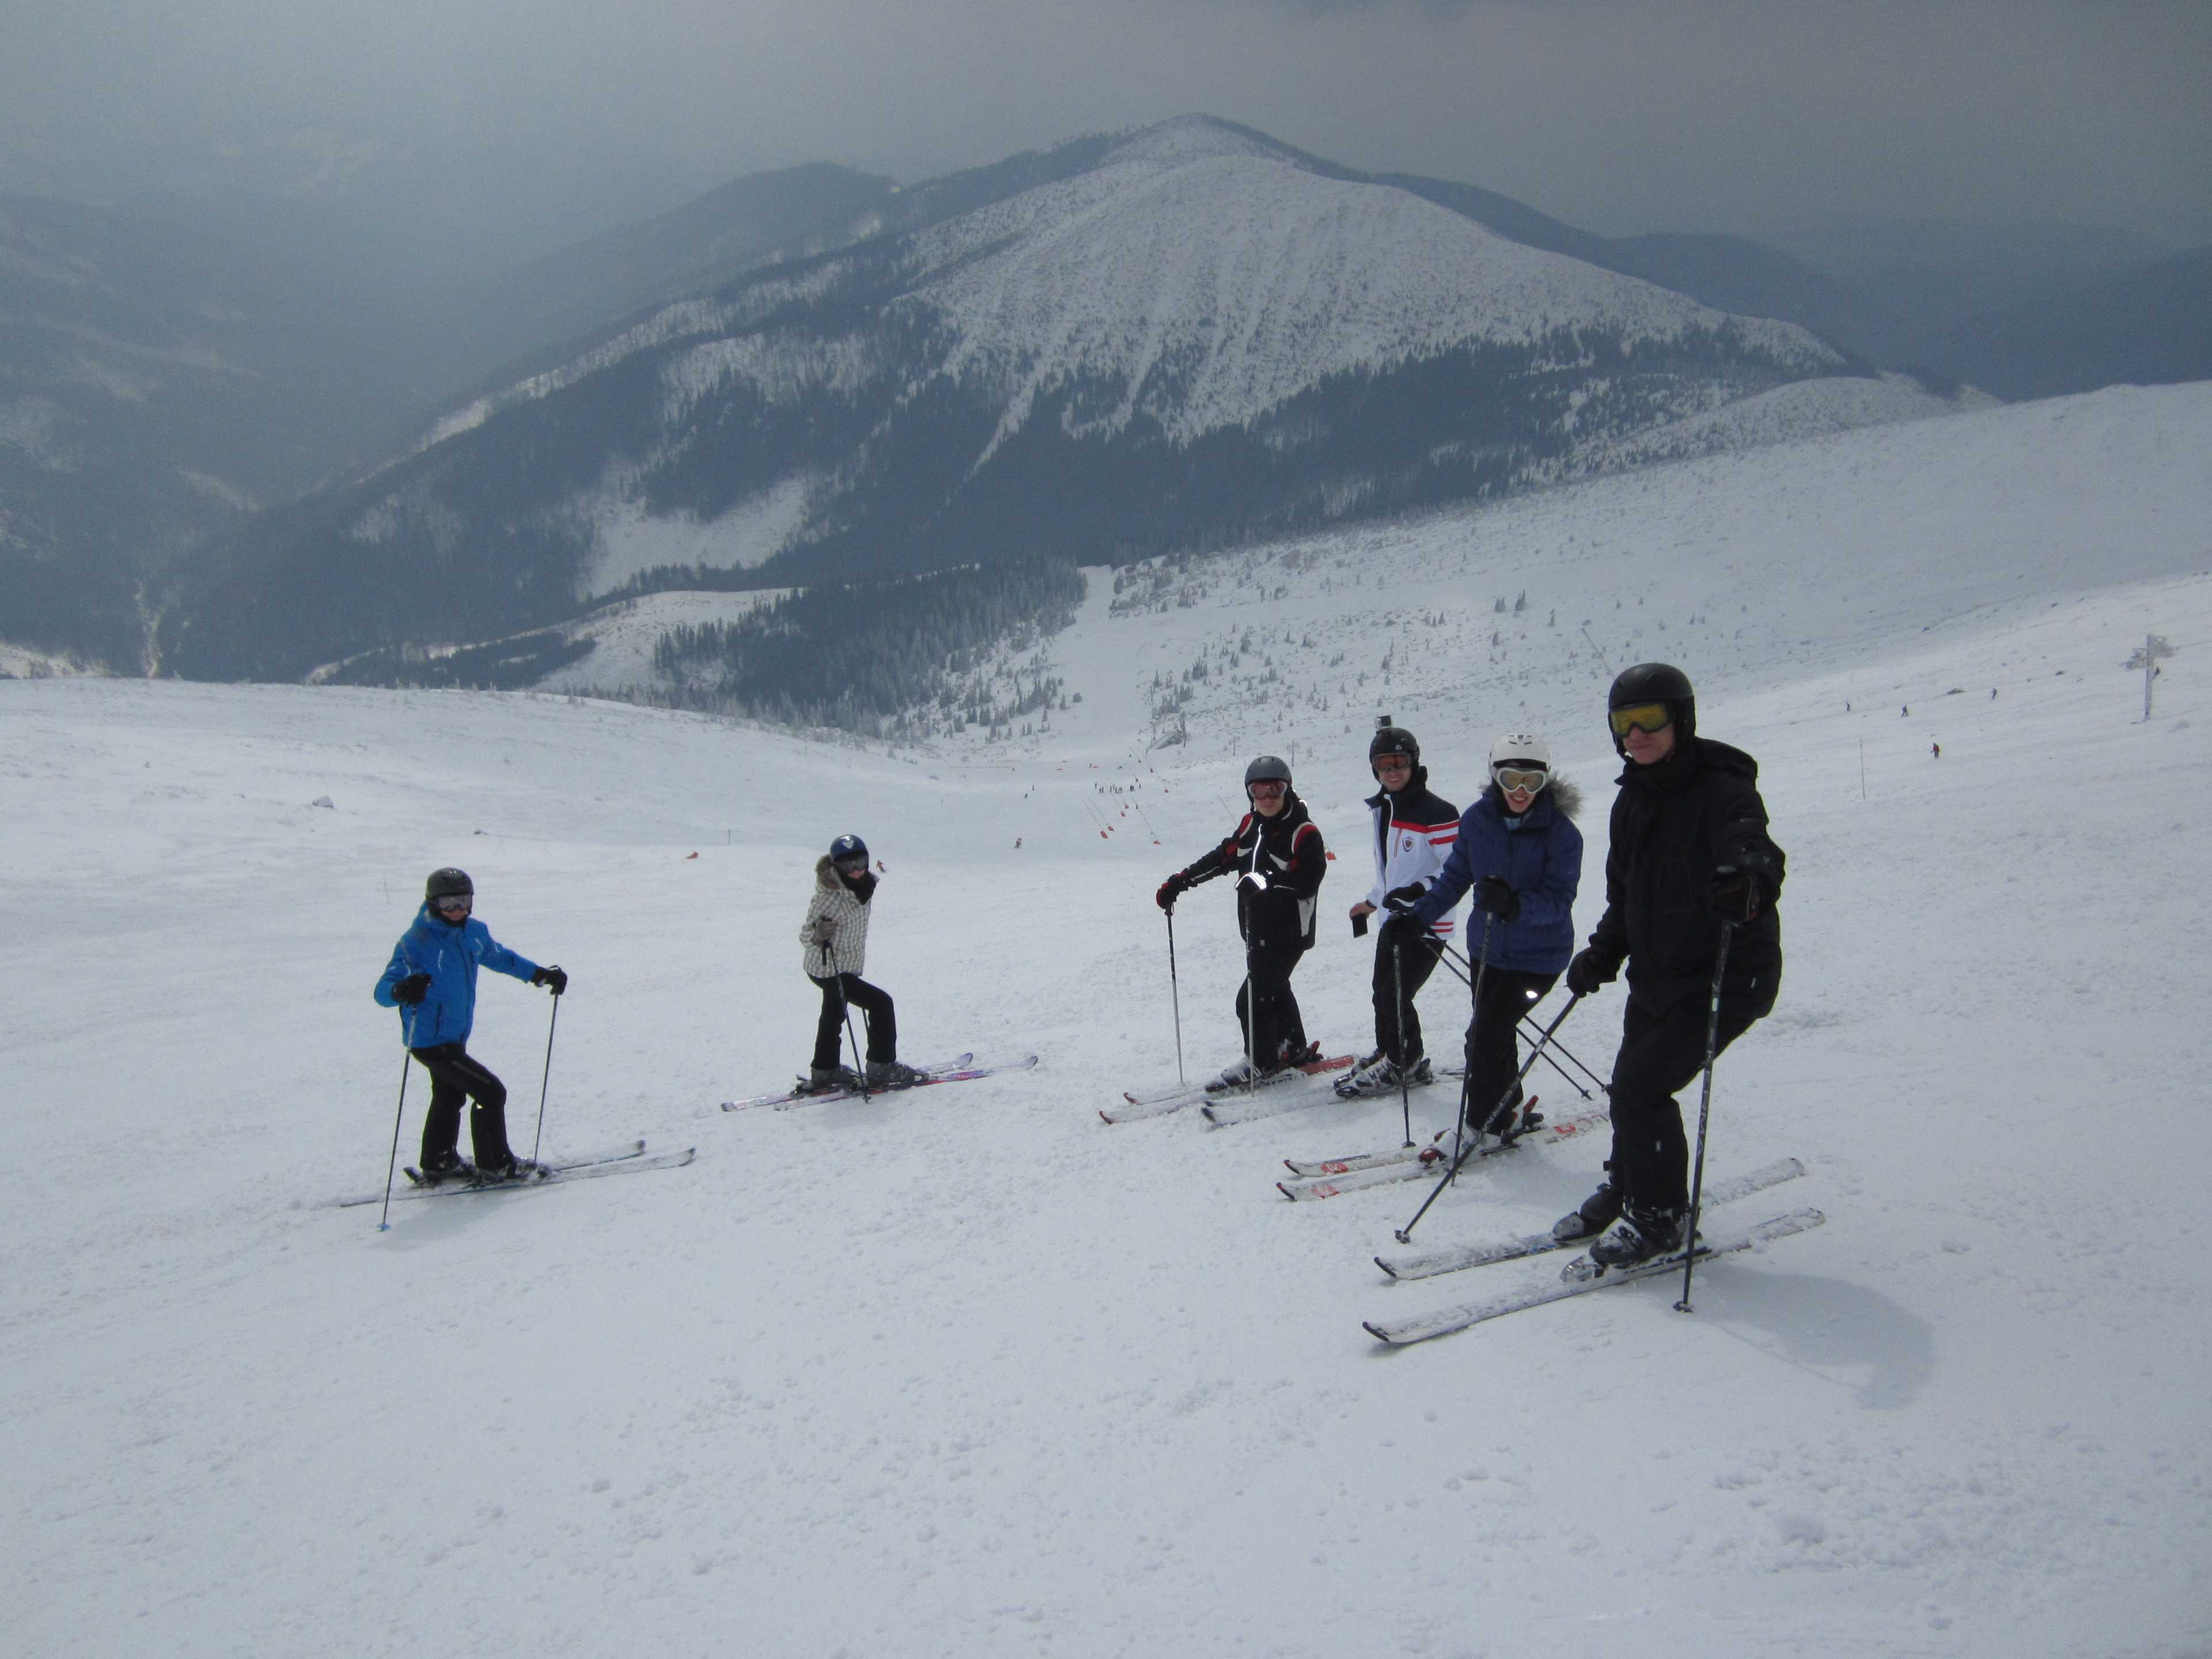 Organising a ski trip? 3 simple tips to help you